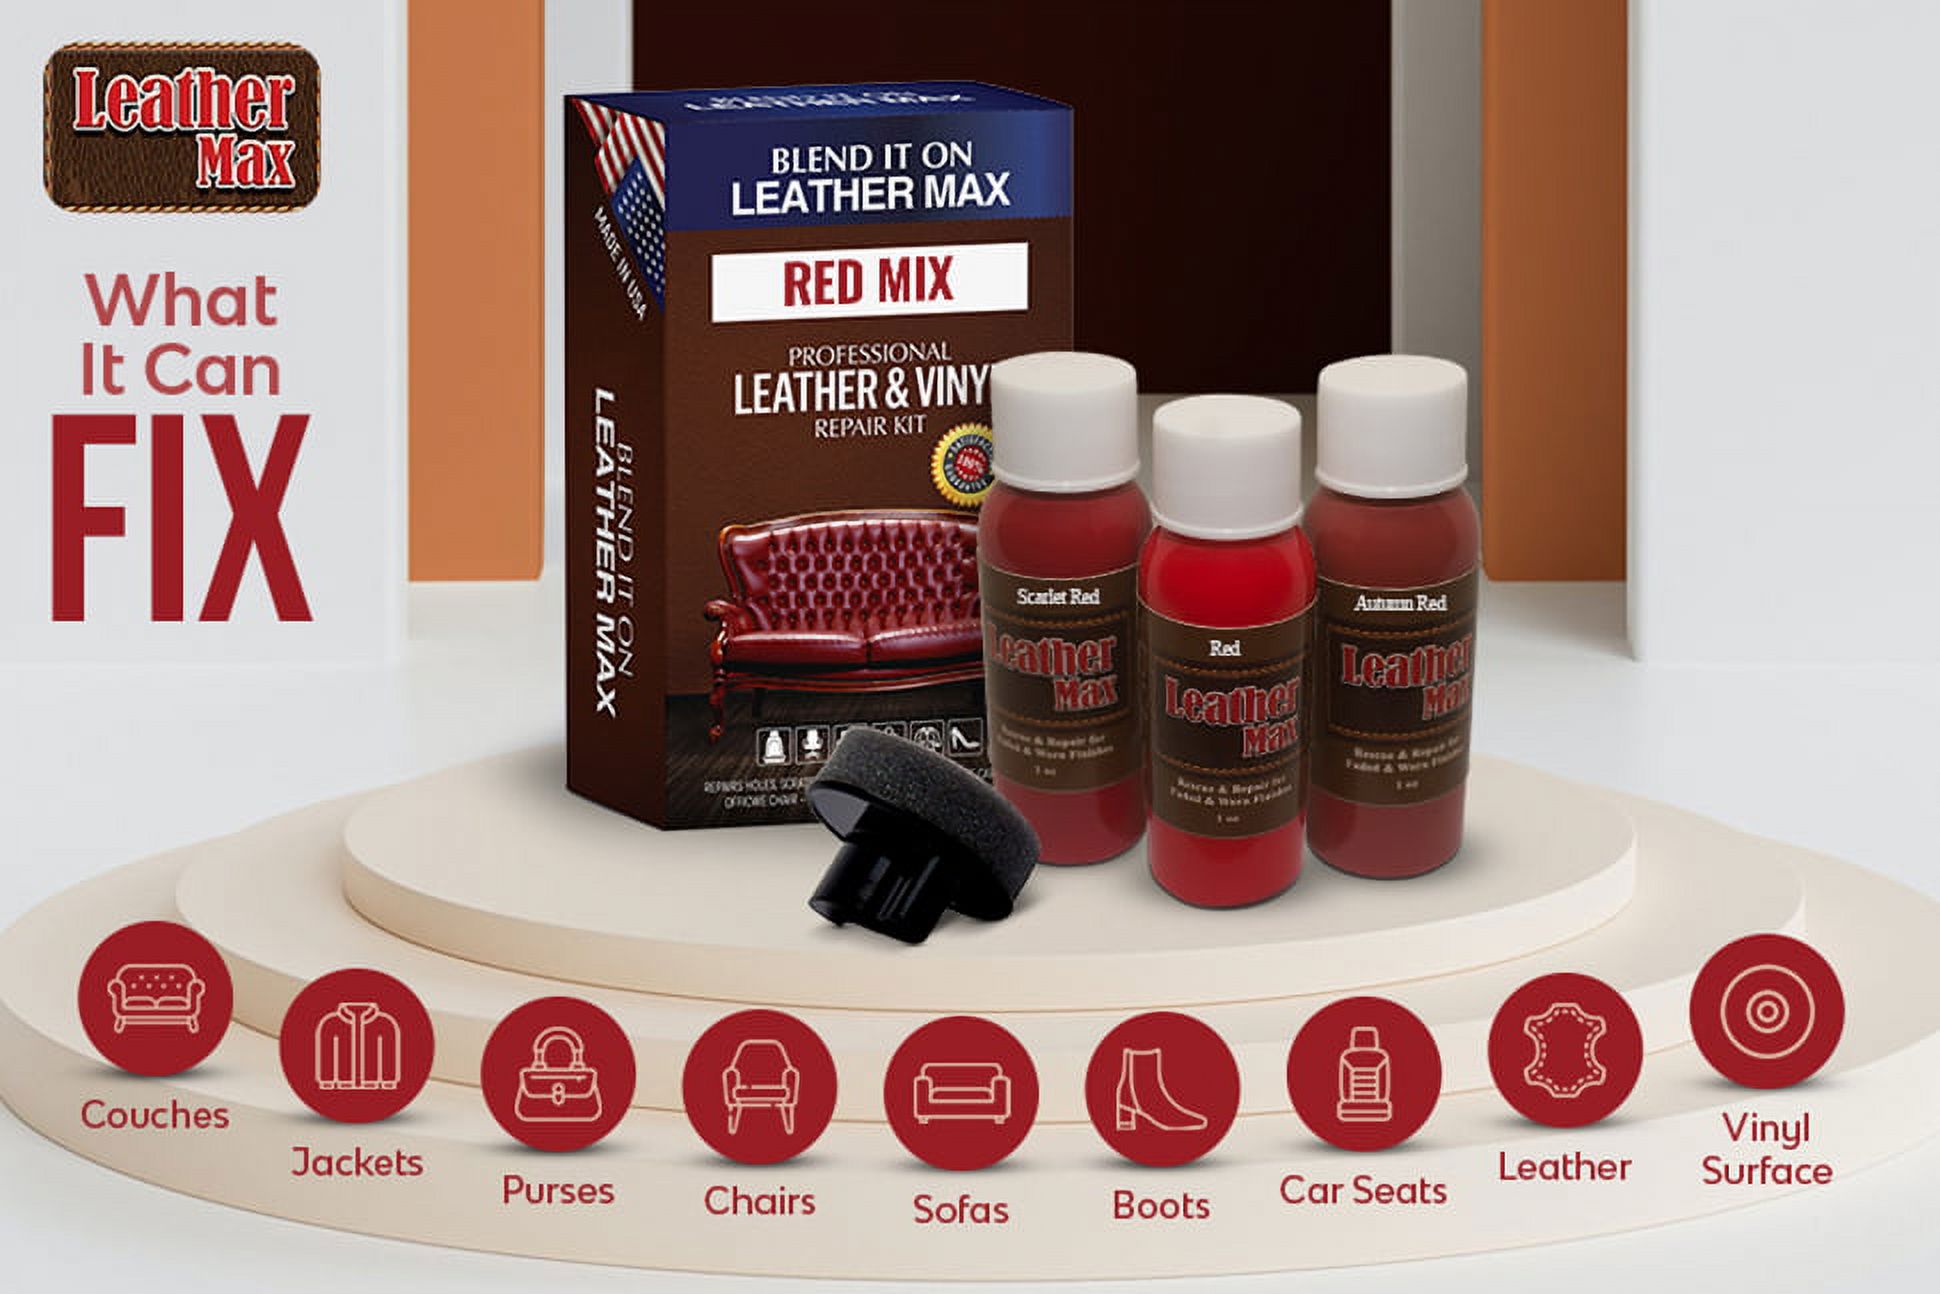 Leather Repair and Refinish for Handbags / Shoes / Boots / Jackets / Leather Max (Blood Red) - image 5 of 5